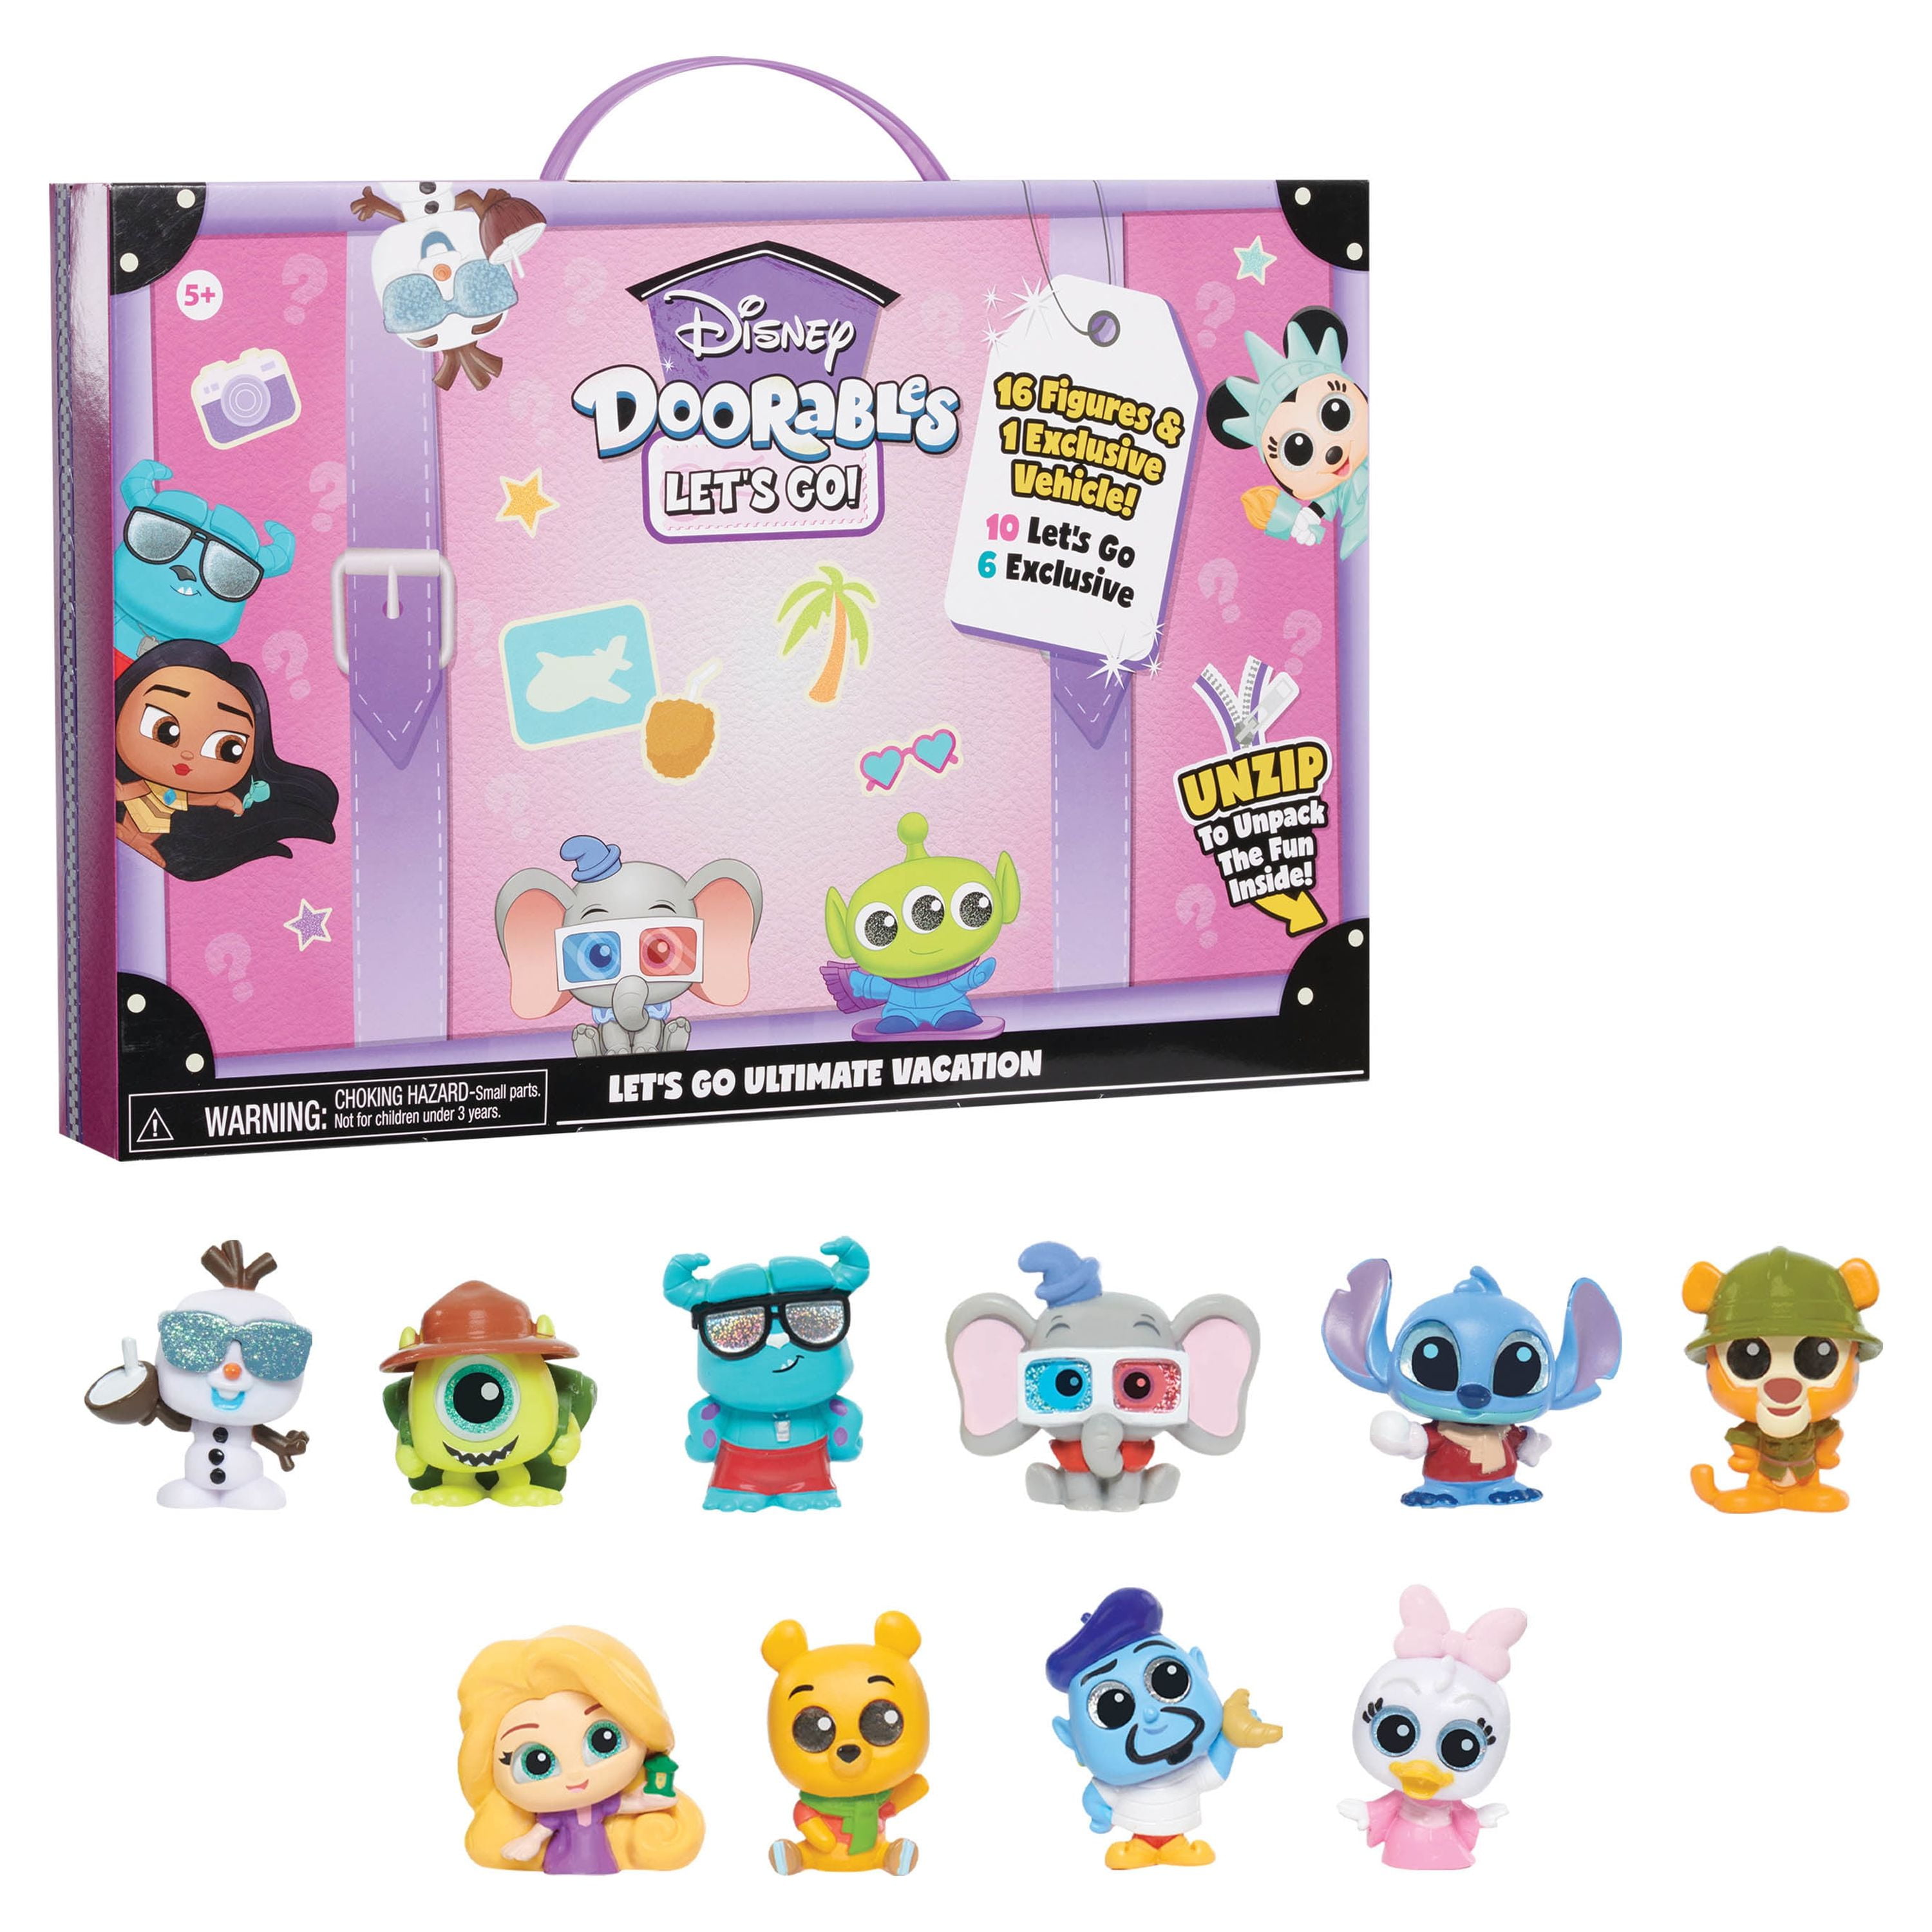 Disney Stitch Collectible Figure Set, Officially Licensed Kids Toys for  Ages 3 Up, Gifts and Presents